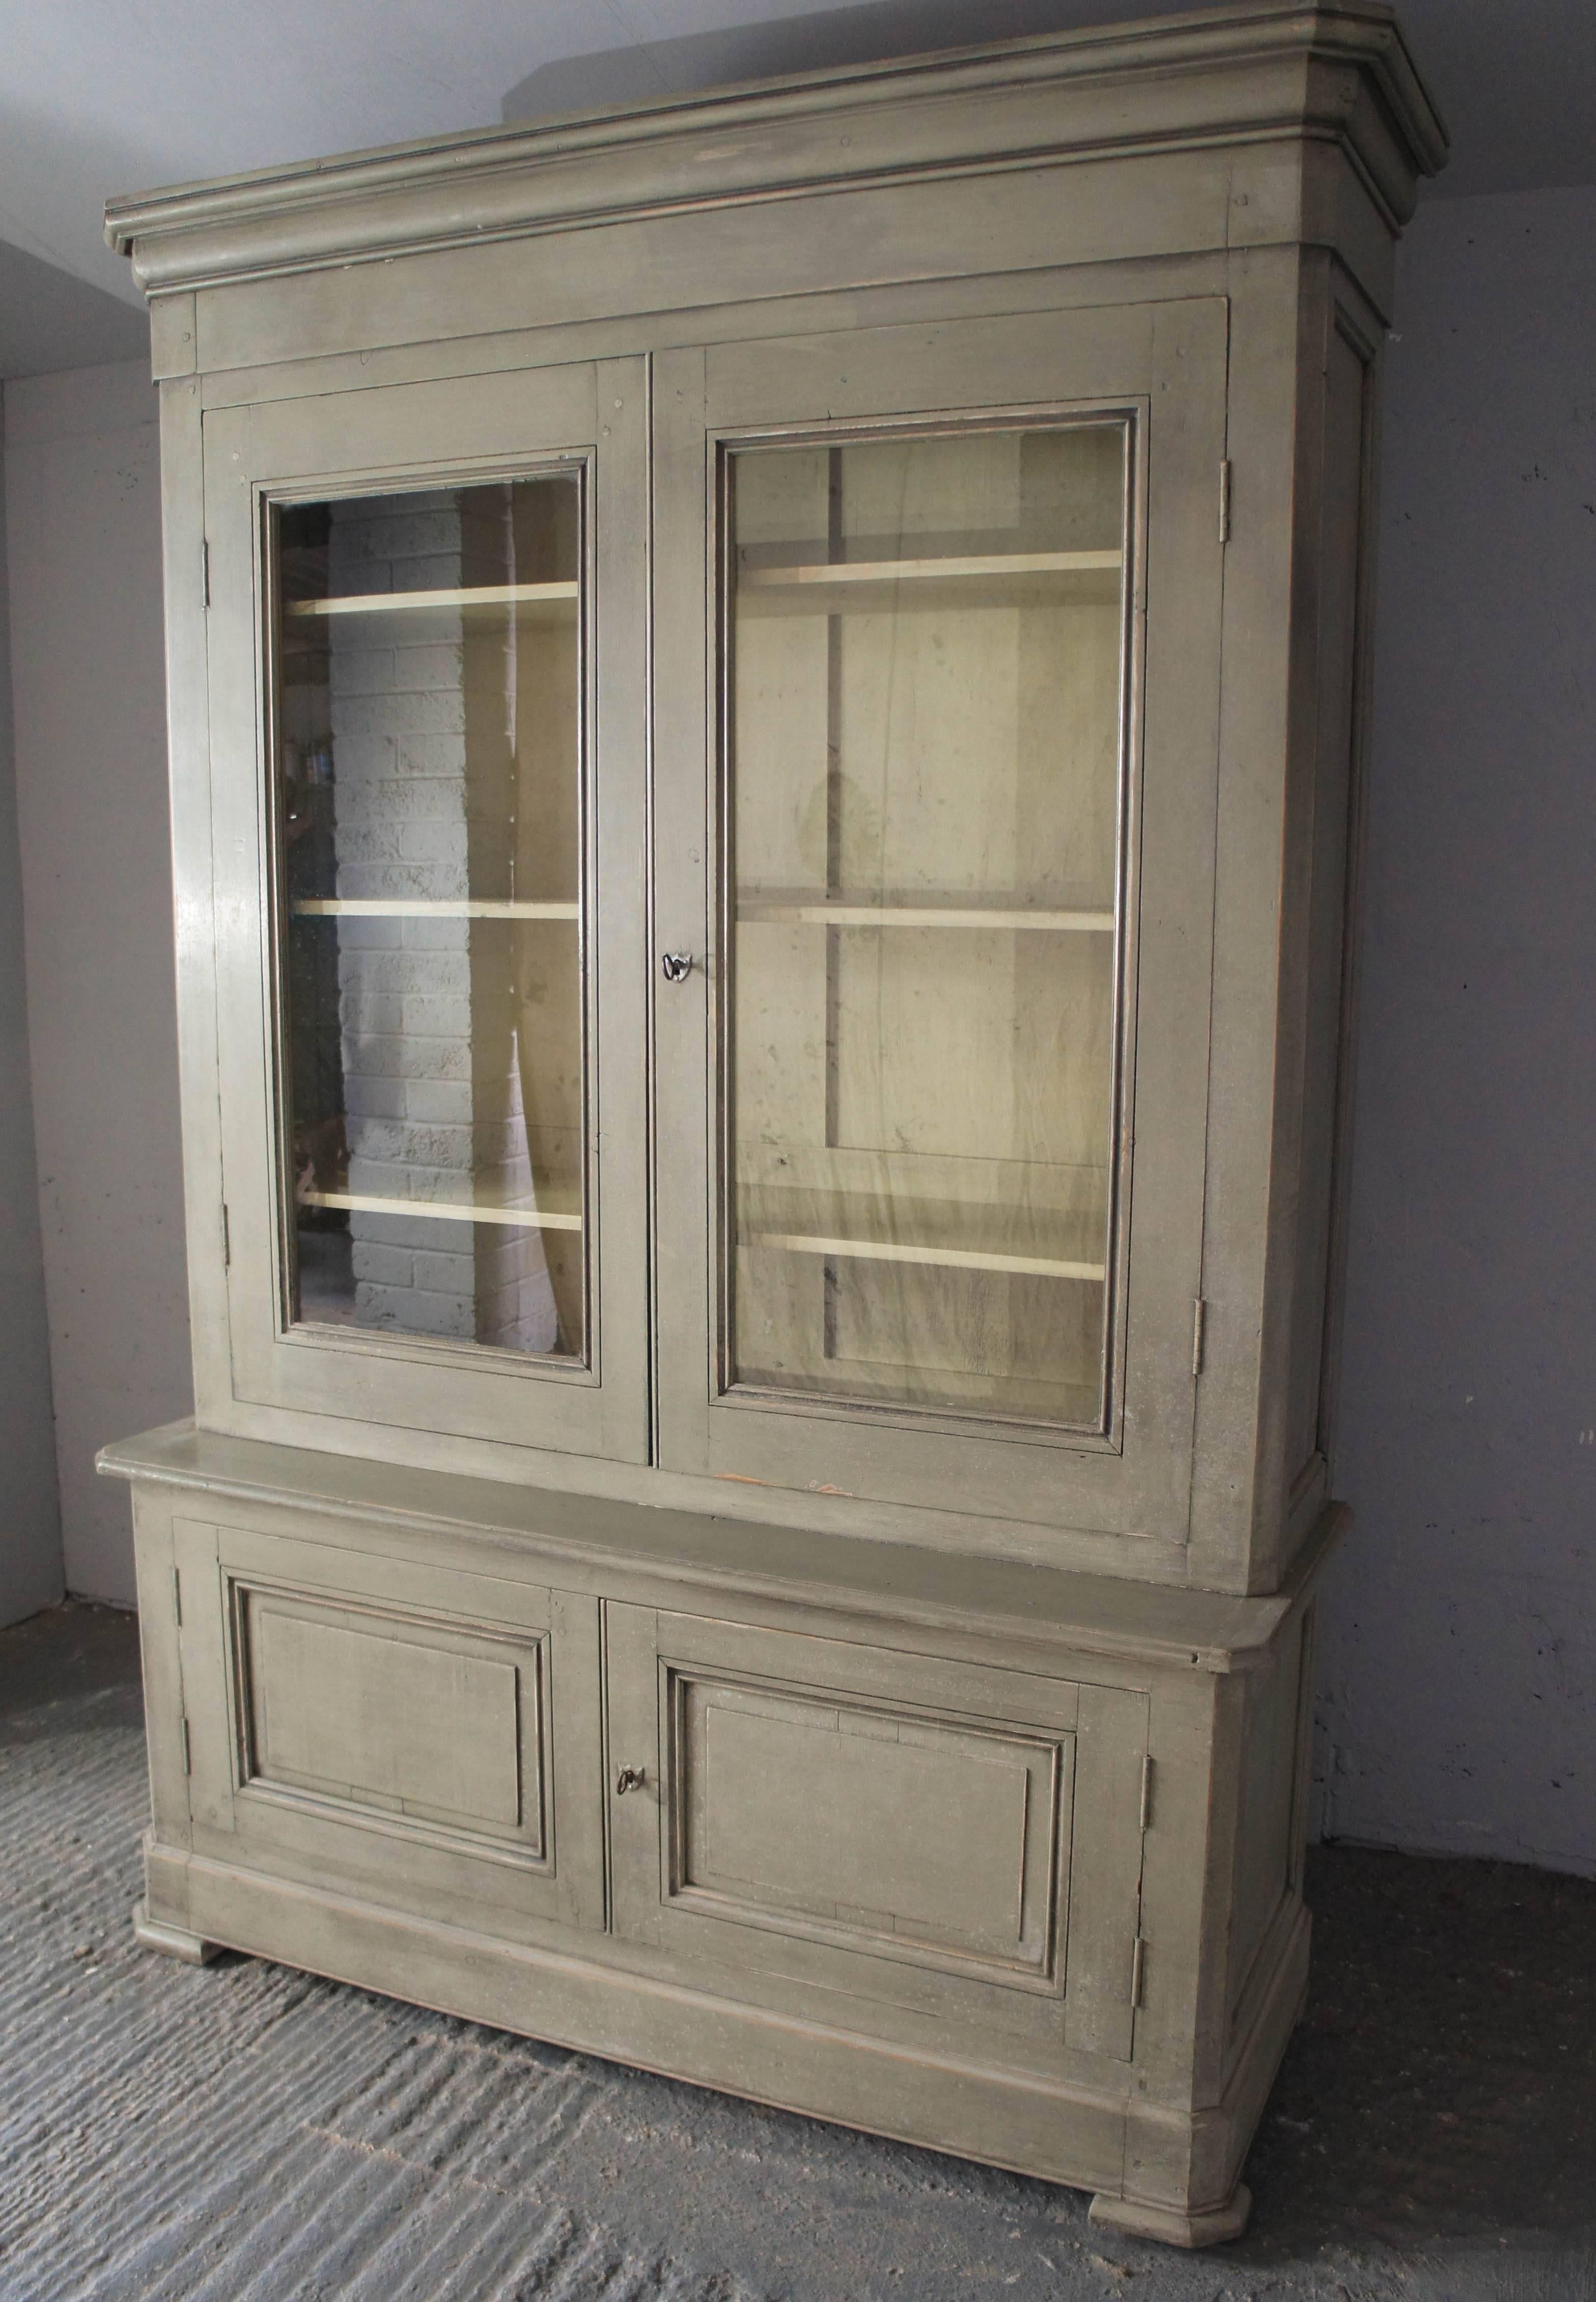 19th Century French Painted Pine Cupboard Bookcase Dresser Display Cabinet  In Good Condition For Sale In Culverthorpe, Lincs